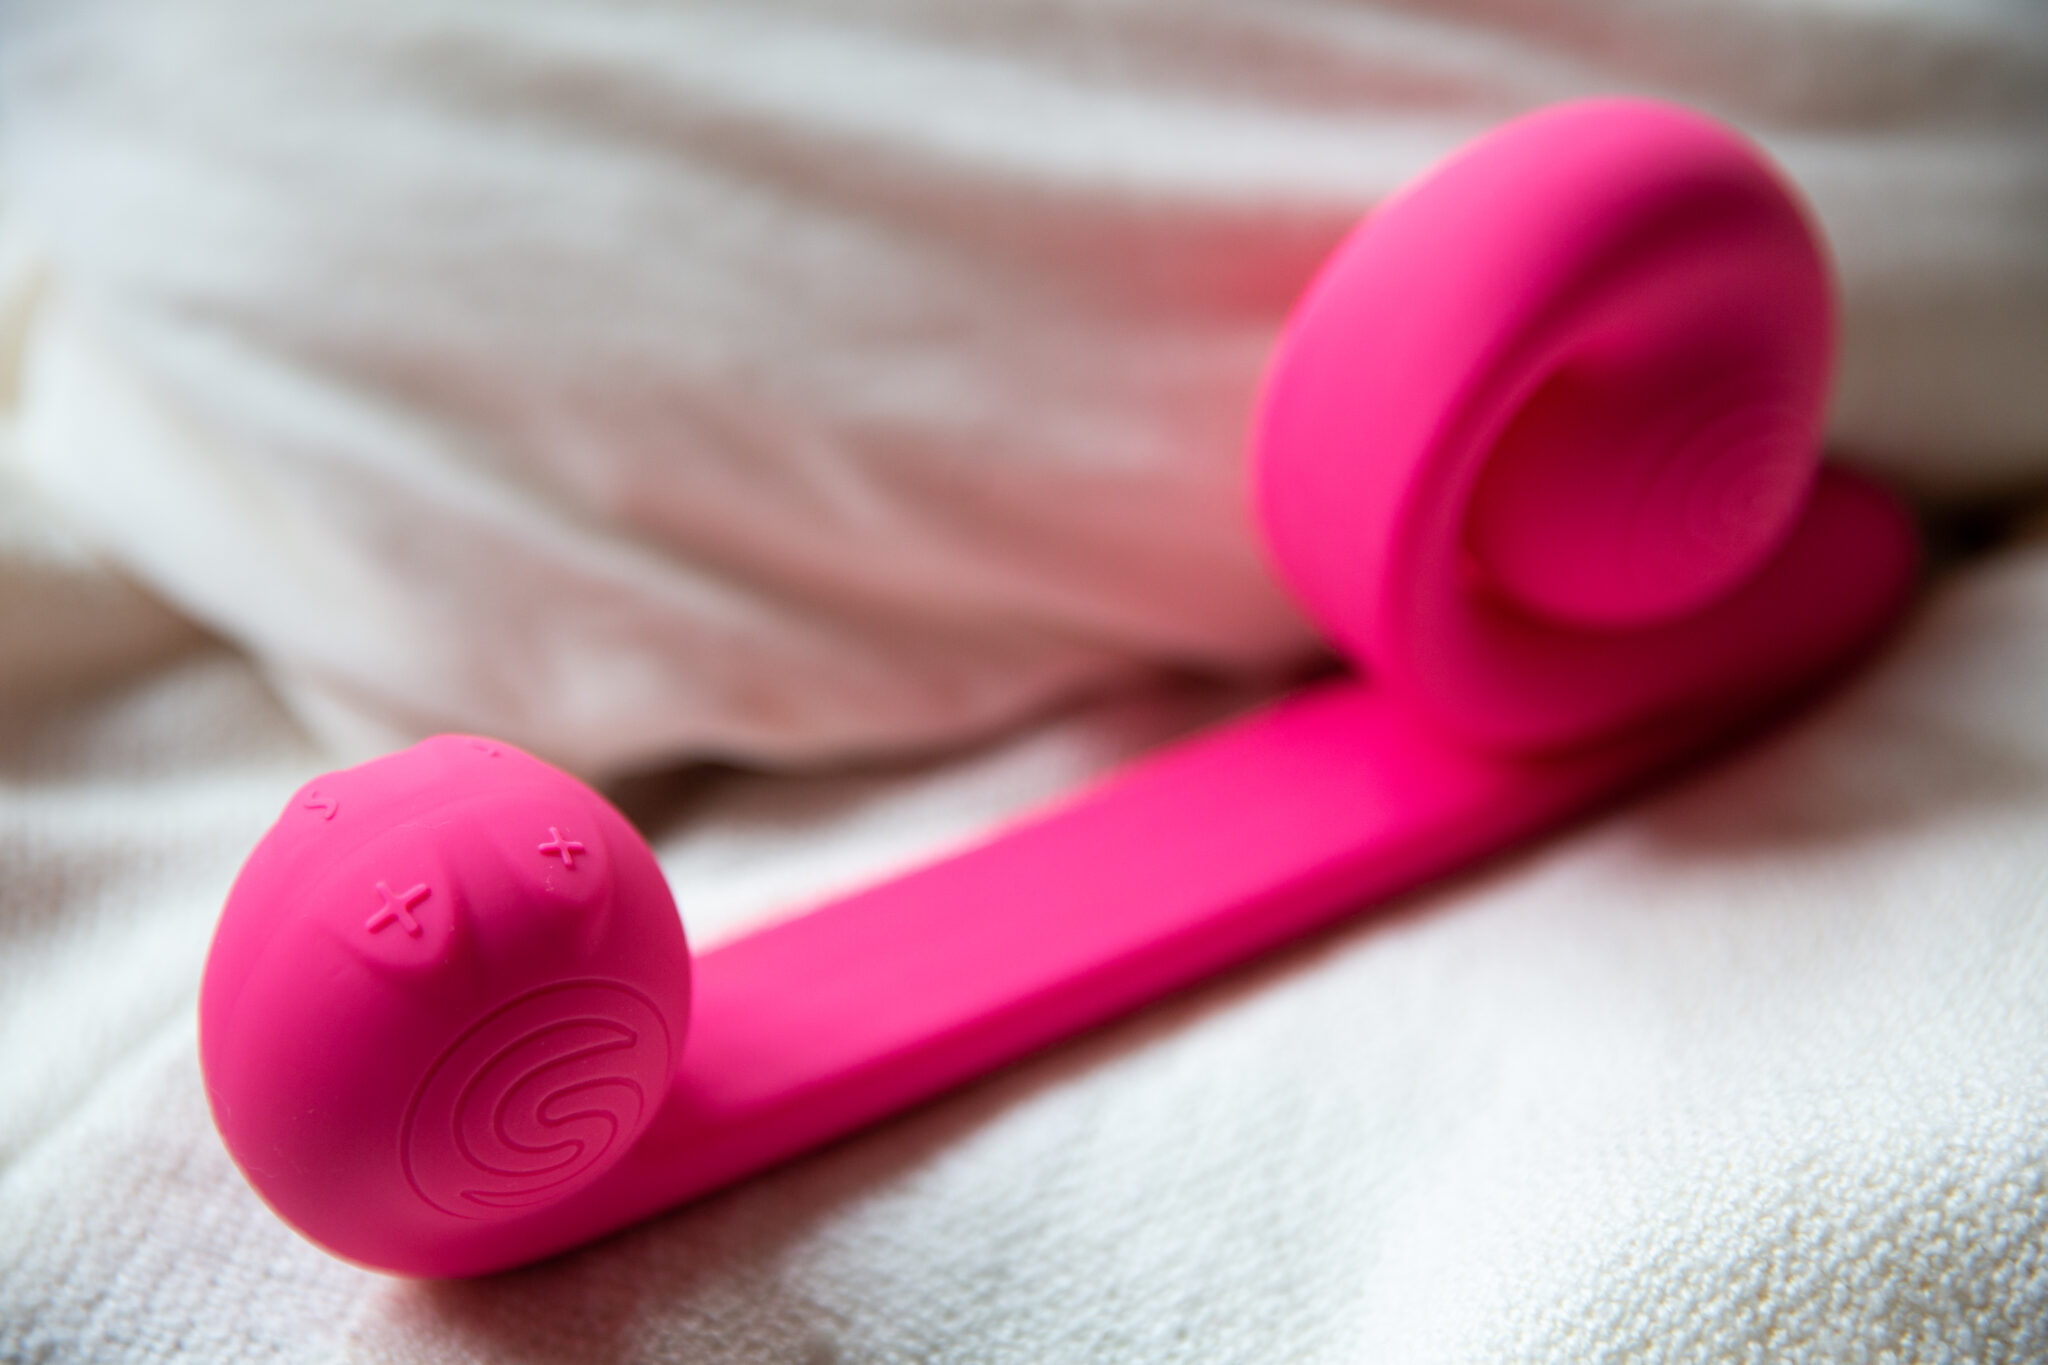 A close-up image of the Snail Vibe's rounded heads and multi-power control.